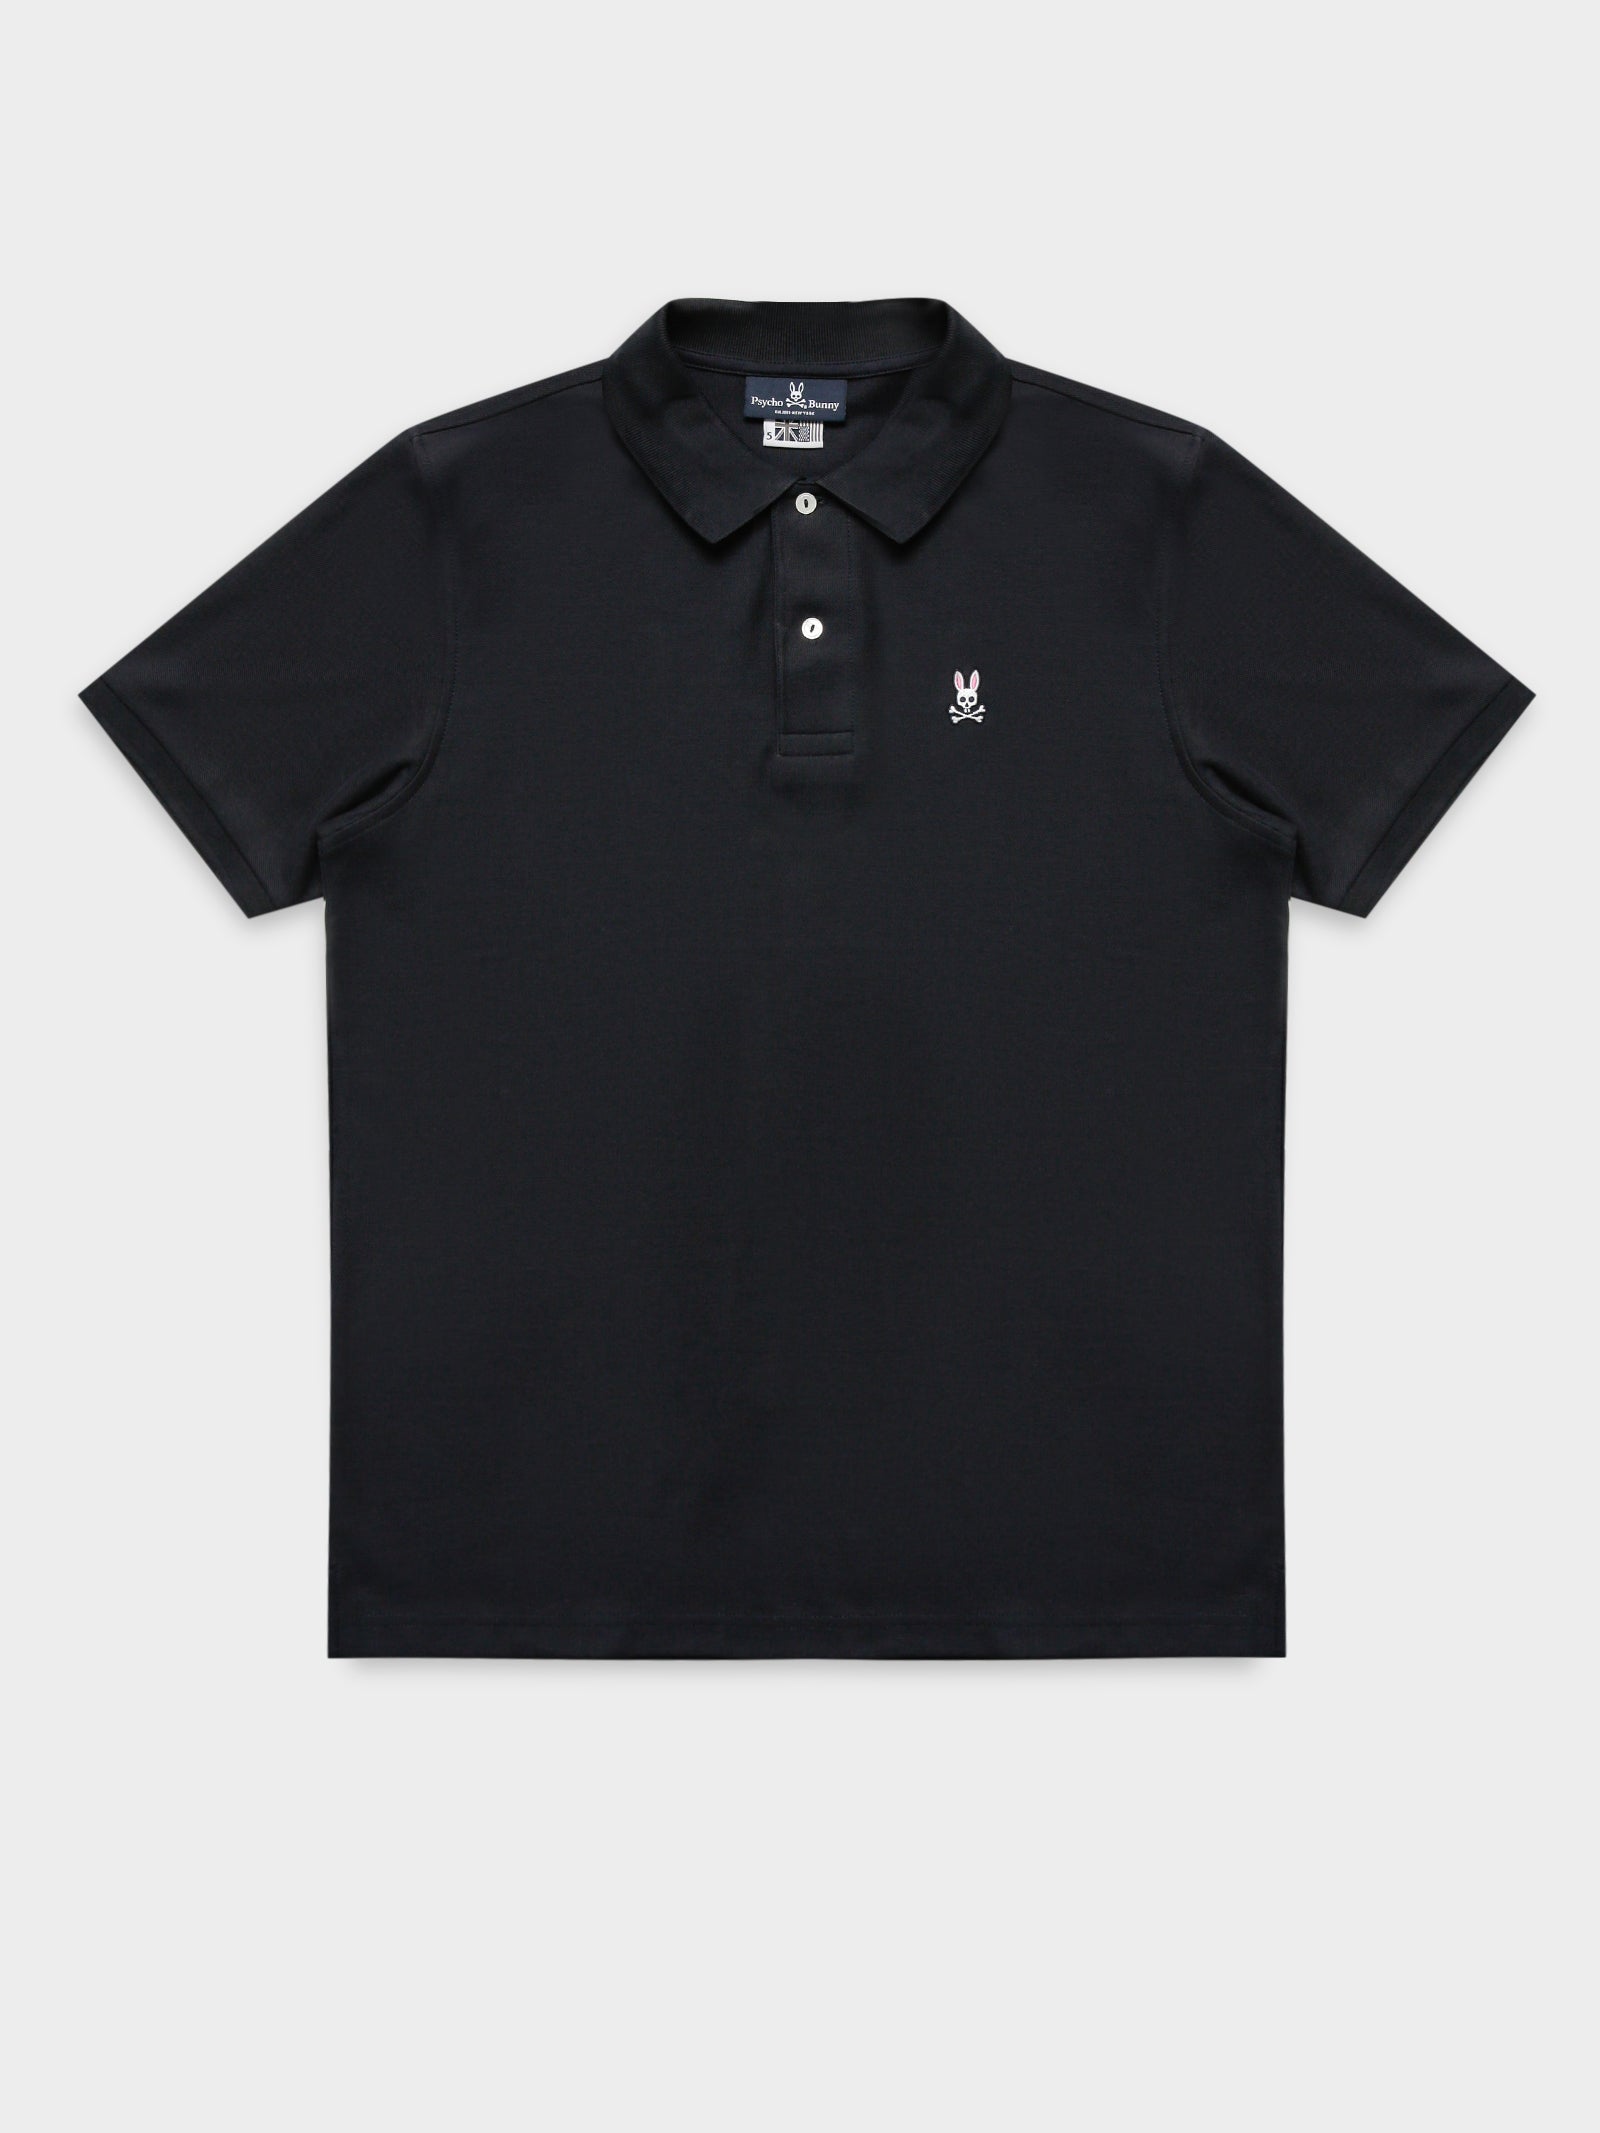 Classic Polo in Navy - Glue Store